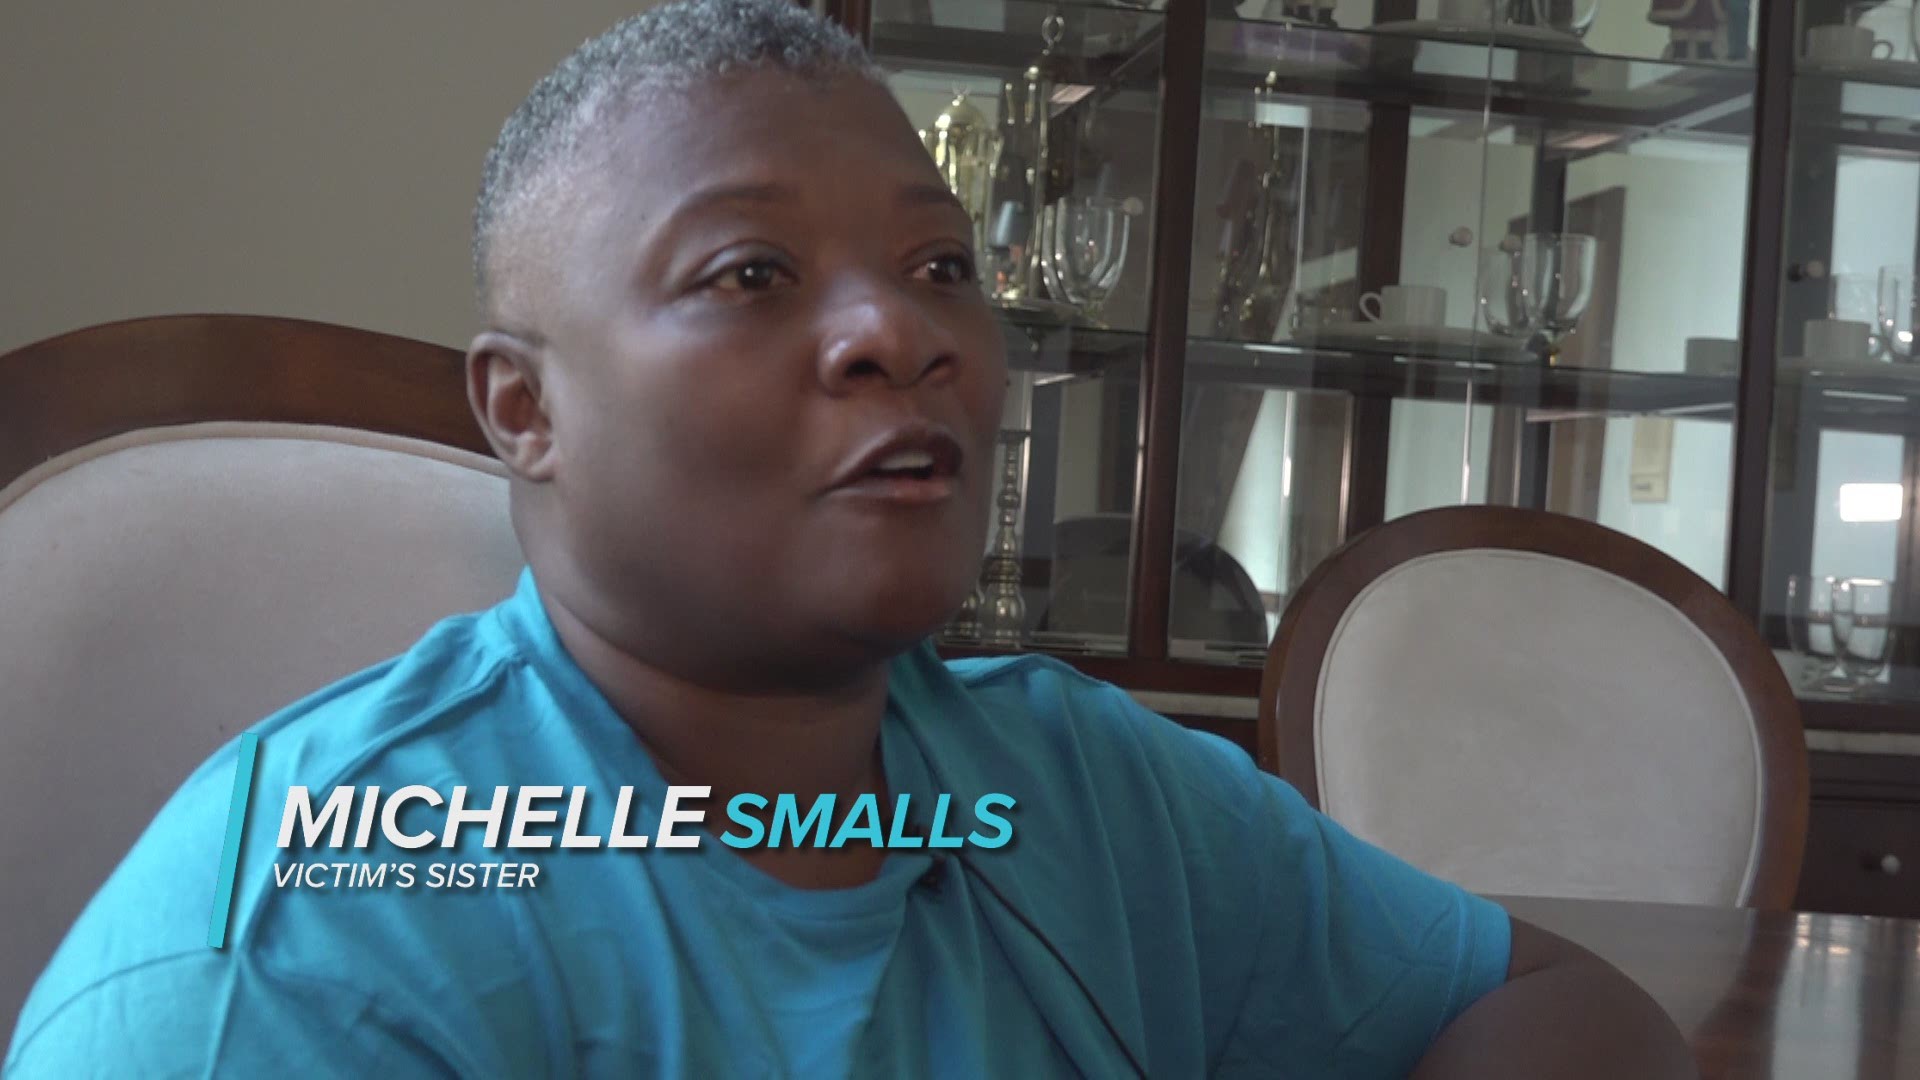 Michelle Smalls speaks out about her brother's homicide investigation